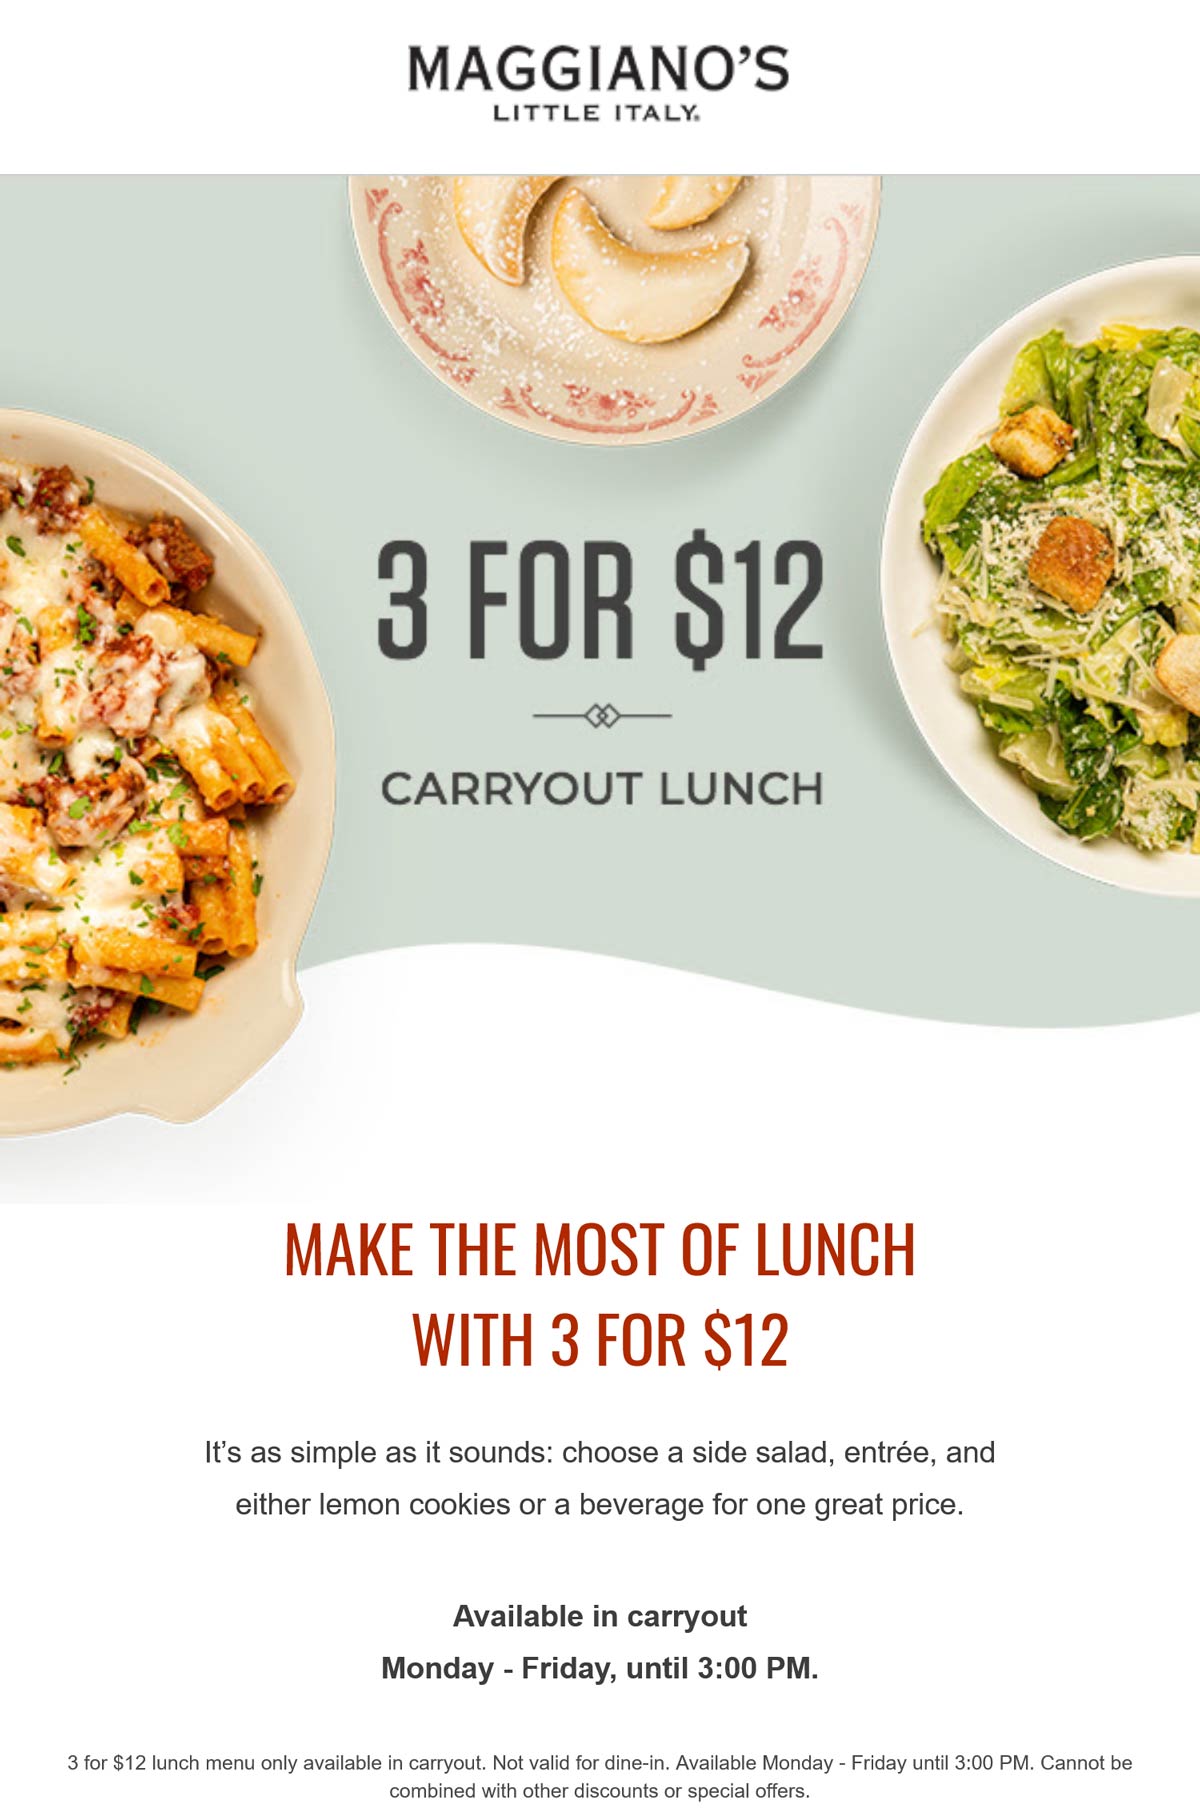 Maggianos Little Italy restaurants Coupon  Entree + salad + beverage = $12 carryout lunch at Maggianos Little Italy #maggianoslittleitaly 